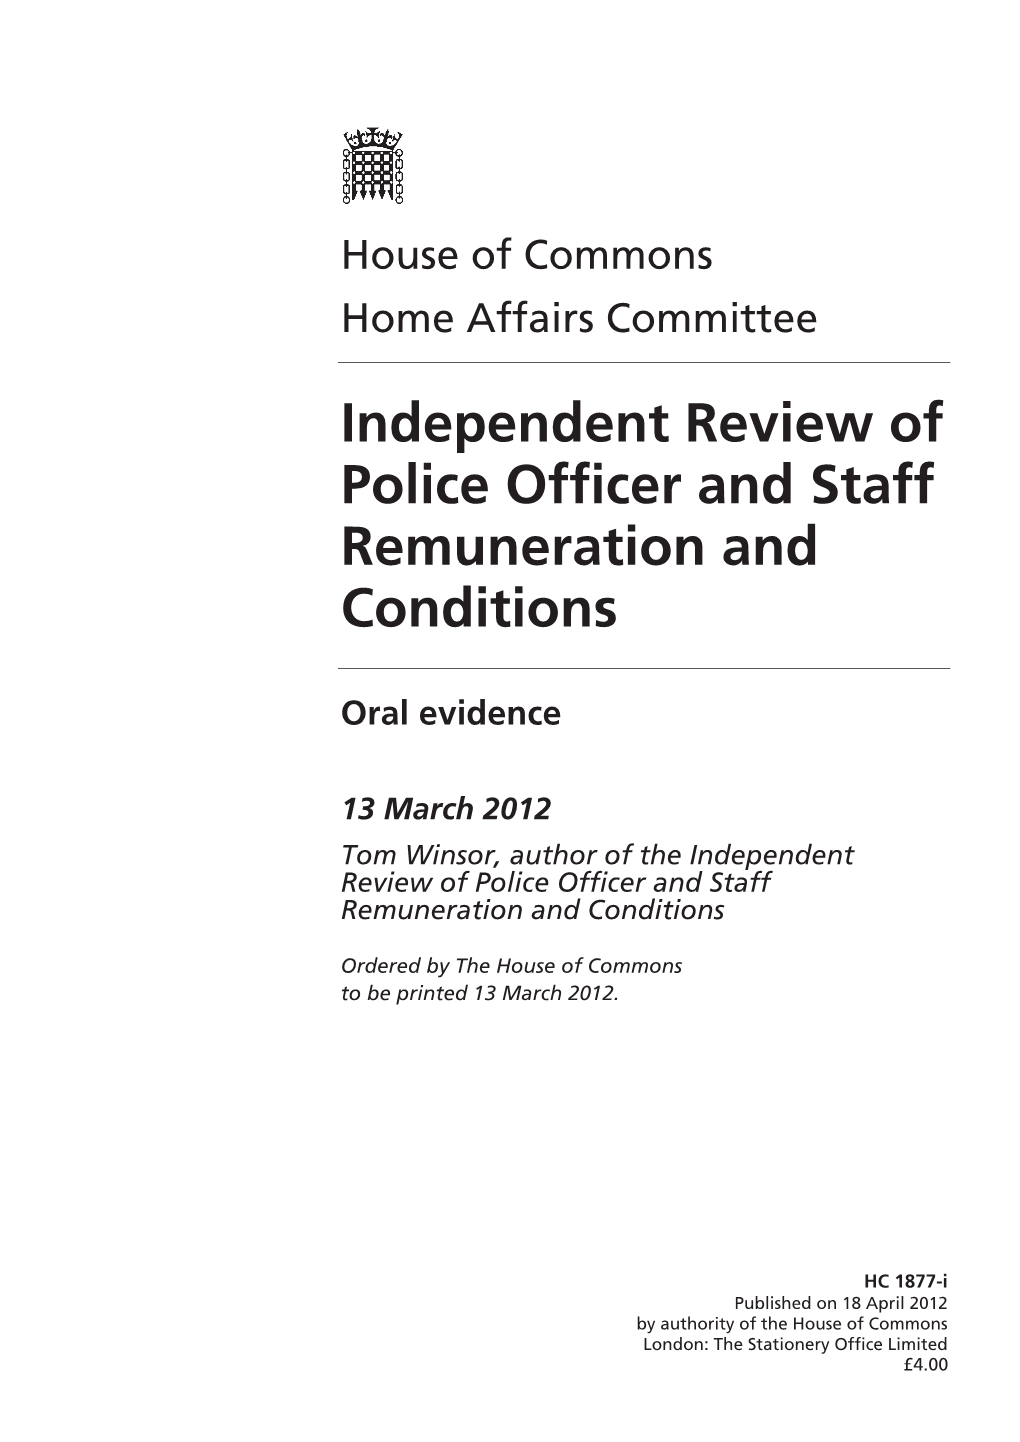 Independent Review of Police Officer and Staff Remuneration and Conditions